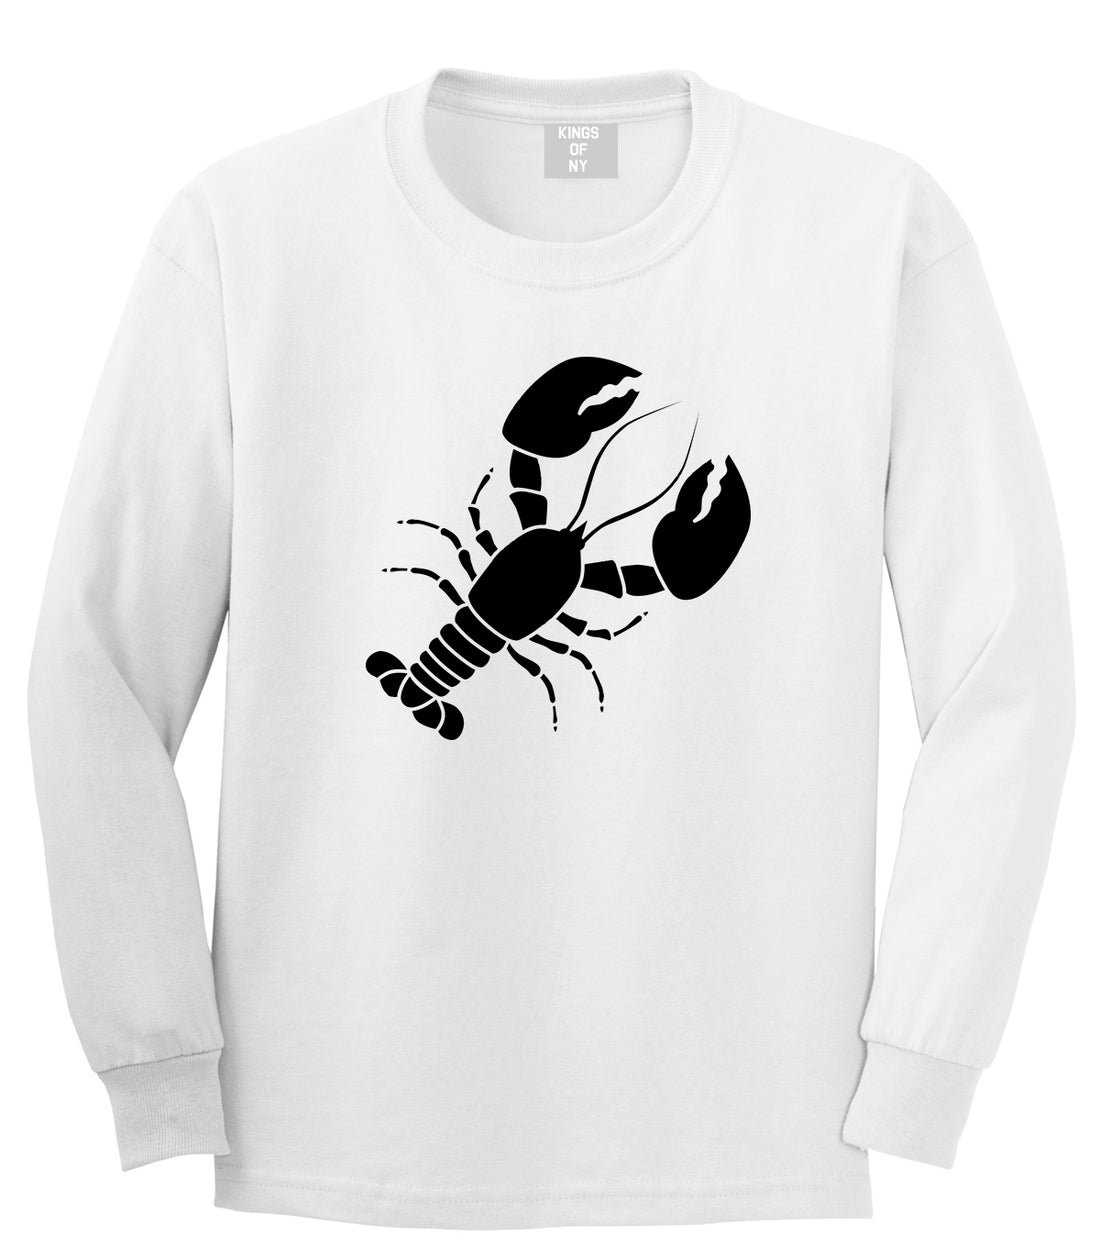 Lobster Mens Long Sleeve T-Shirt White by Kings Of NY